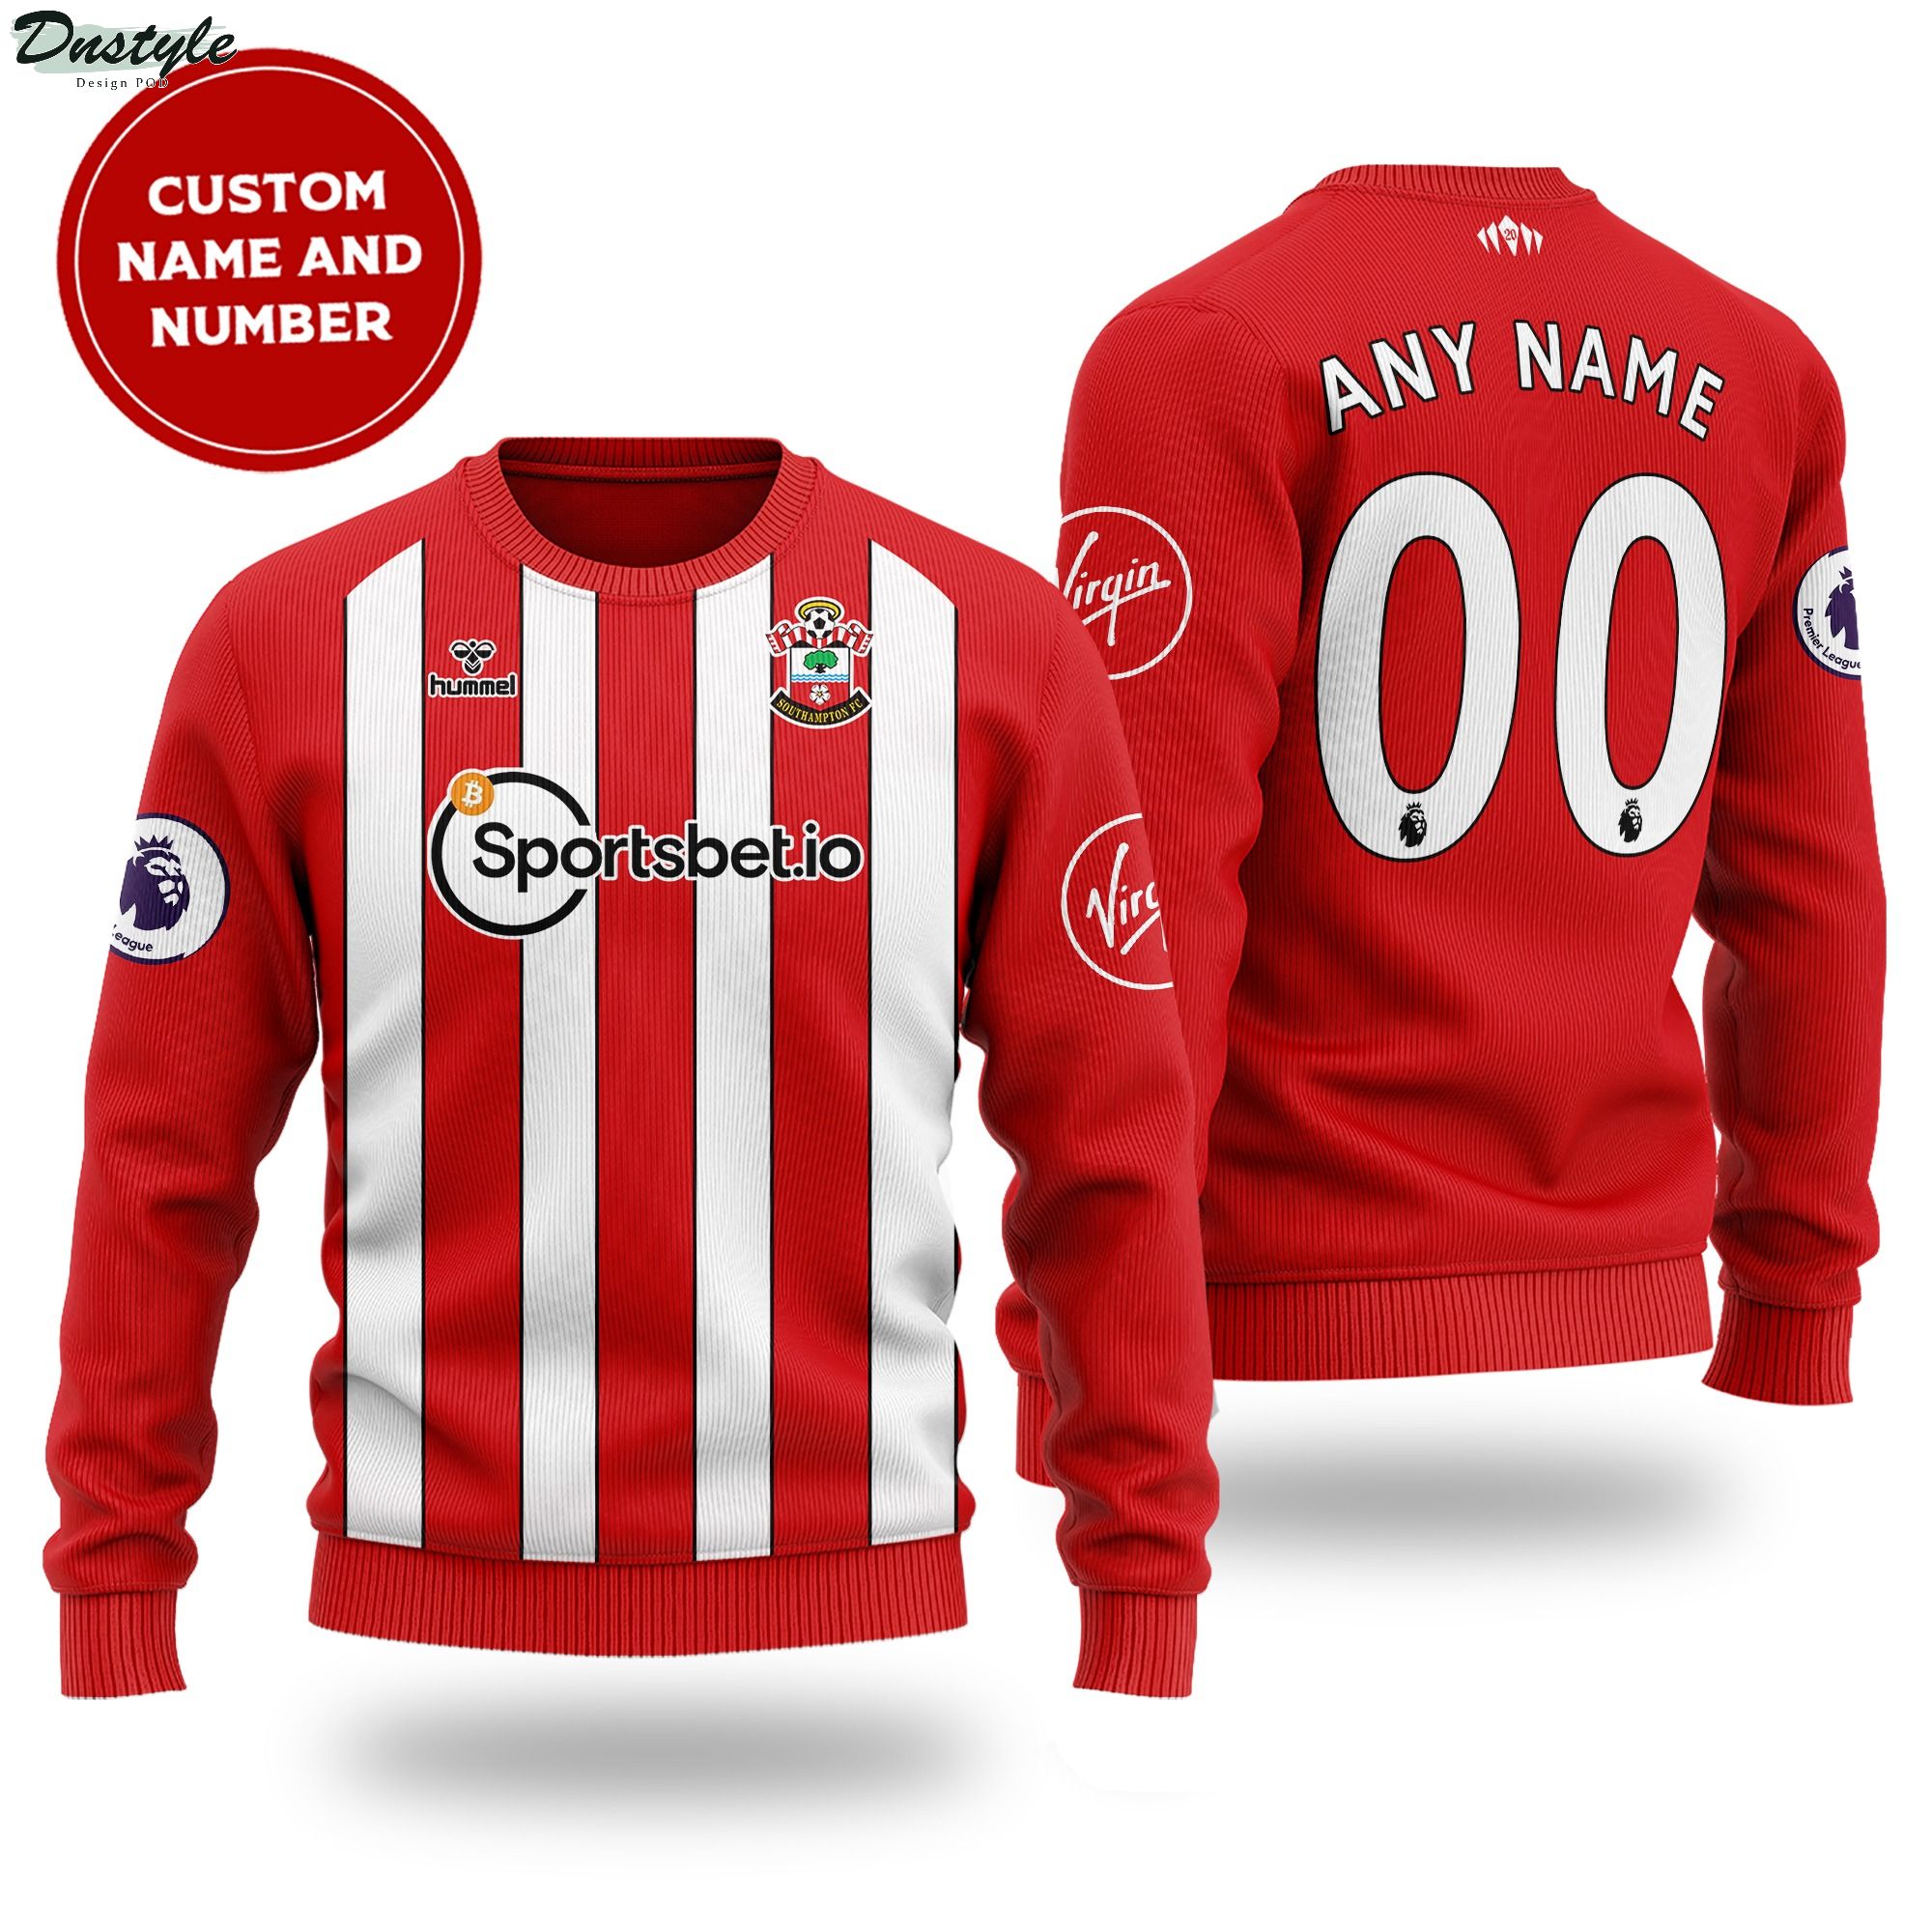 Southampton custom name and number ugly sweater